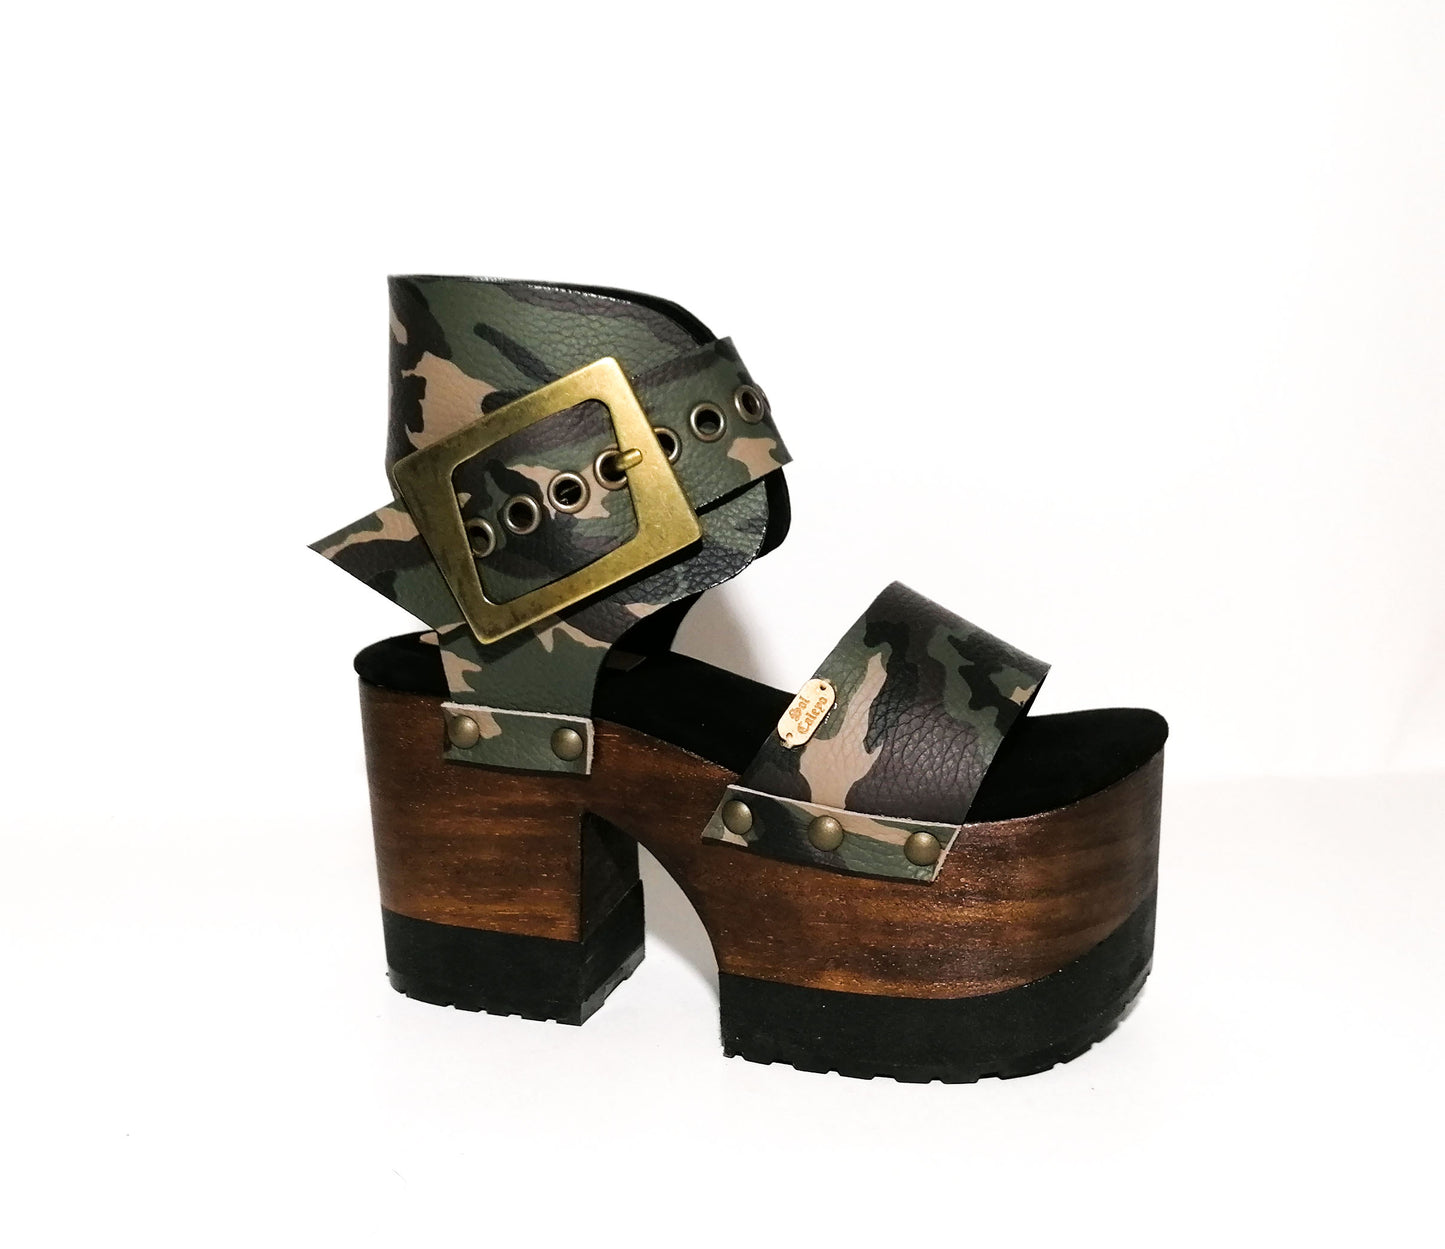 90's style platform clog sandal. Platform sandal handmade in military leather. Wooden heel in military style. Sizes 34 to 47. High quality handmade leather shoes by sol Caleyo. Sustainable fashion.